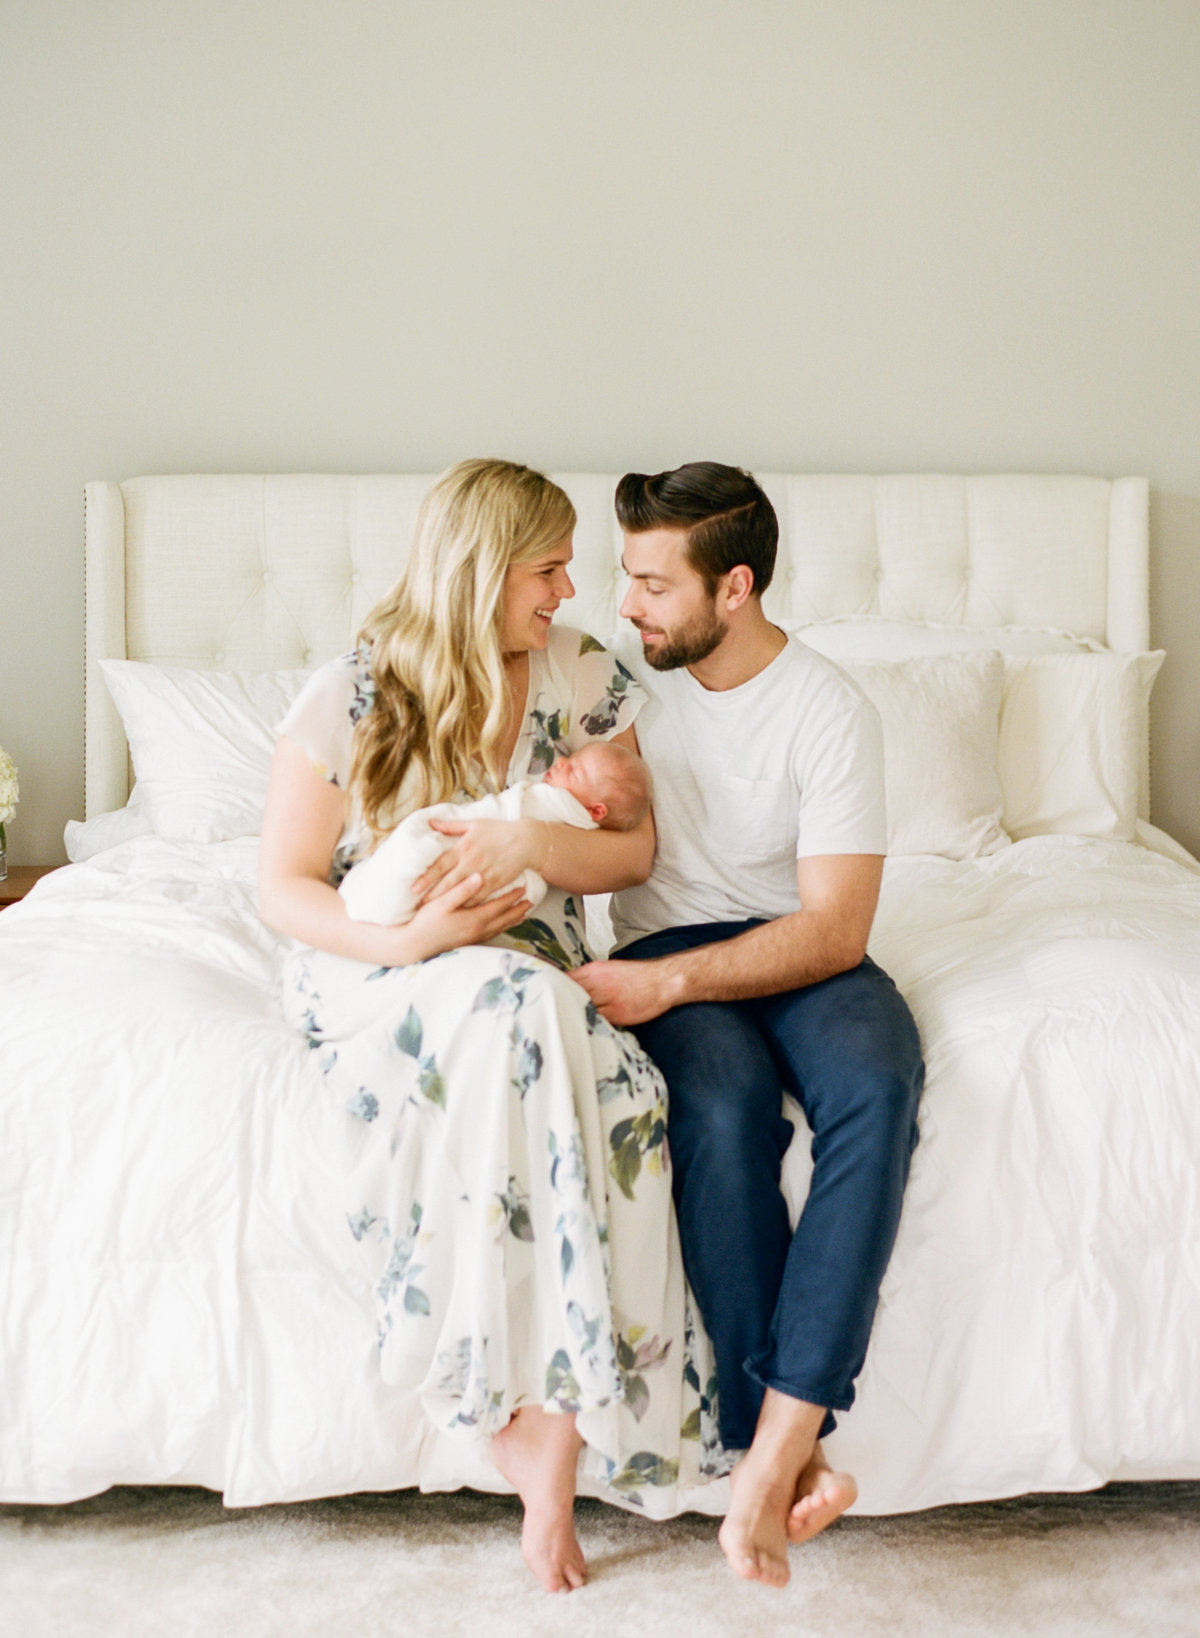 New parents smiling at their baby boy as they sit on their bed snuggling during their Raleigh newborn photography session. Photographed by Raleigh Newborn Photographers A.J. Dunlap Photography